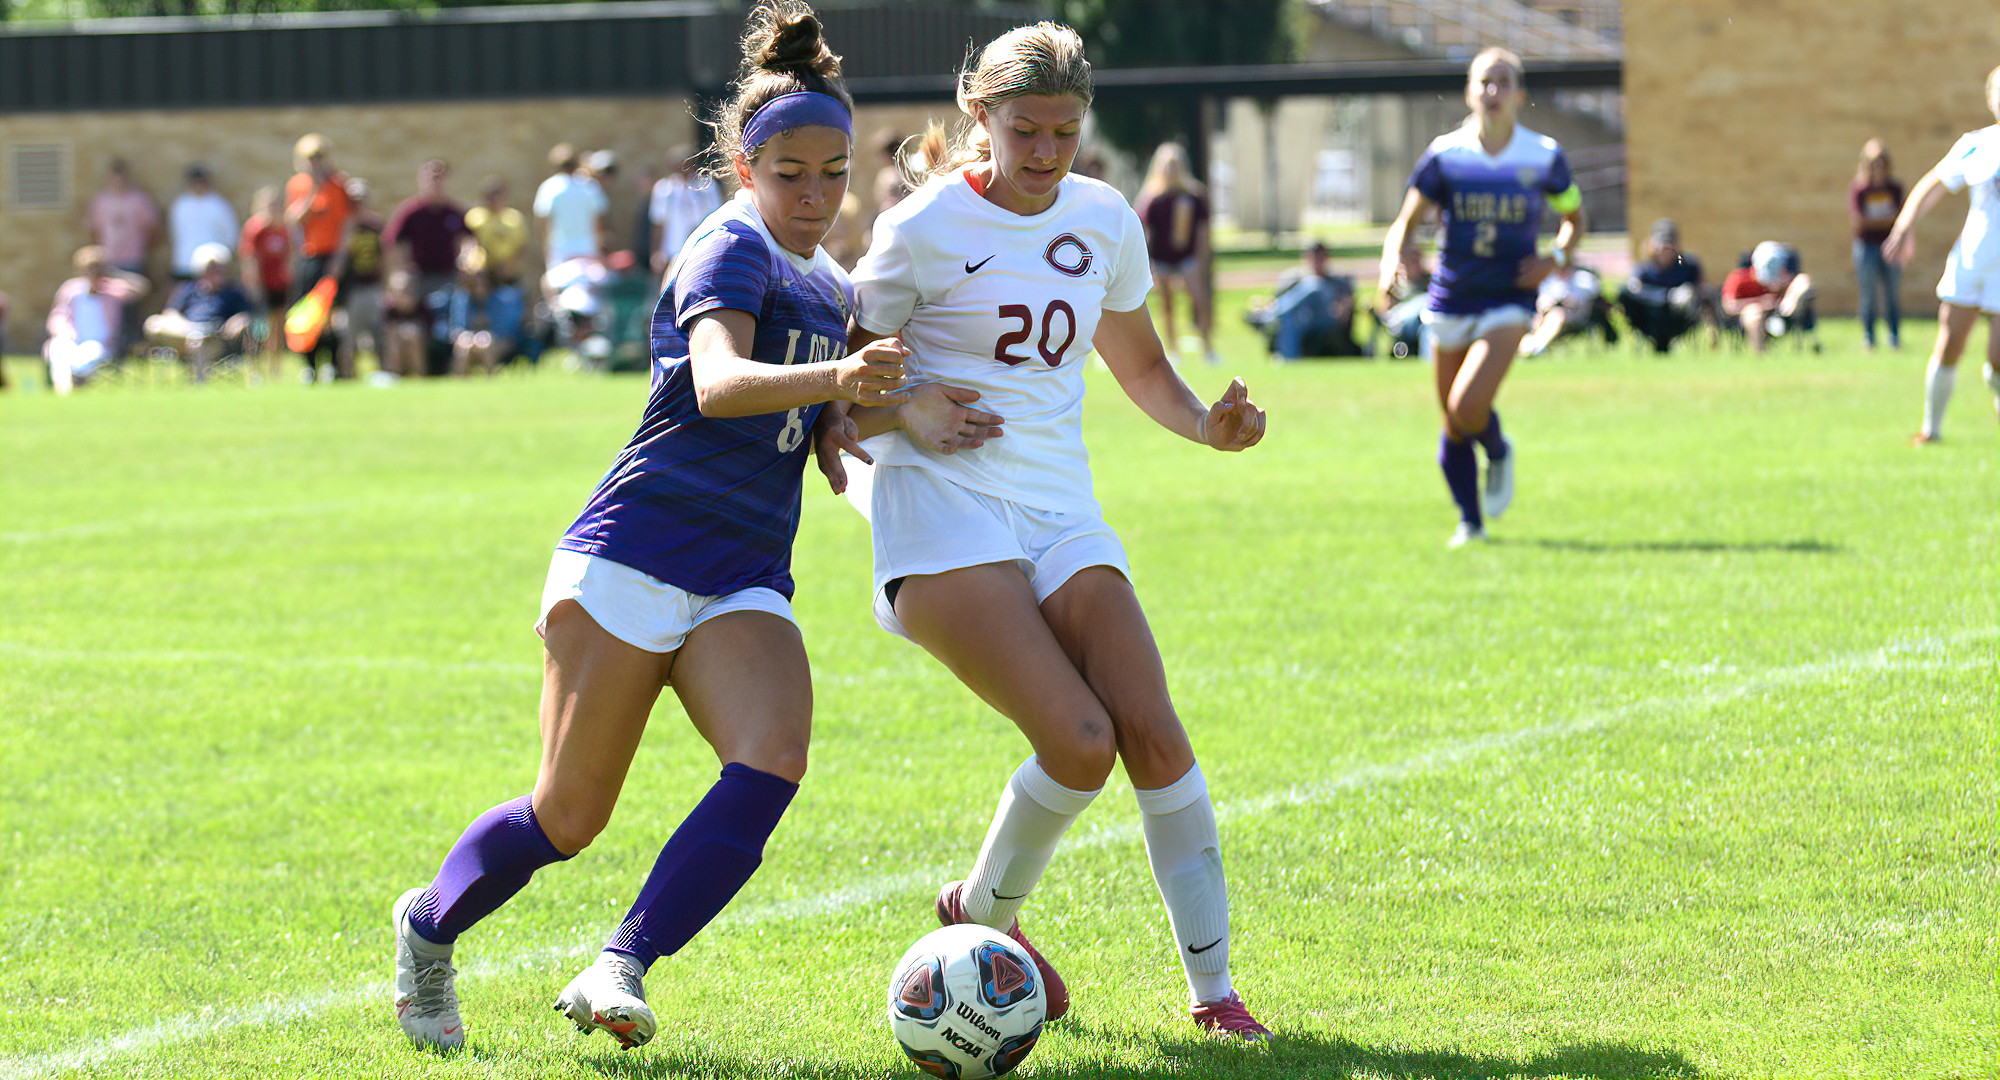 Freshman Hallie Thompson tries to win the ball from a Loras attacker during the Cobbers' game with the Duhawks.